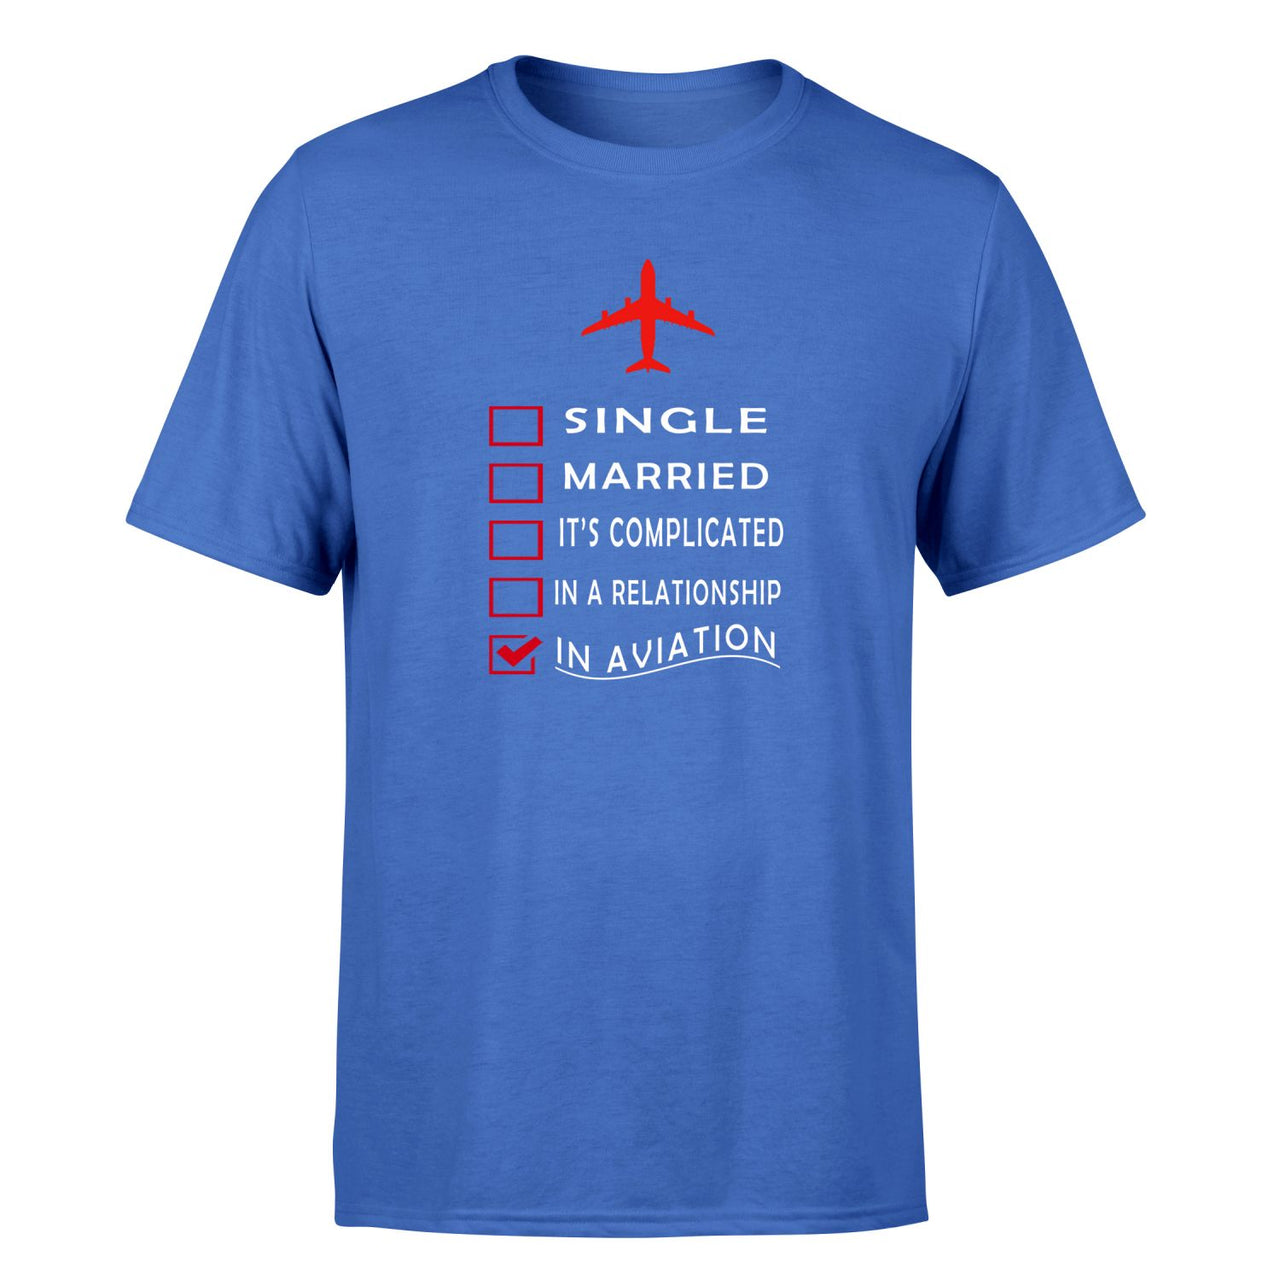 In Aviation Designed T-Shirts